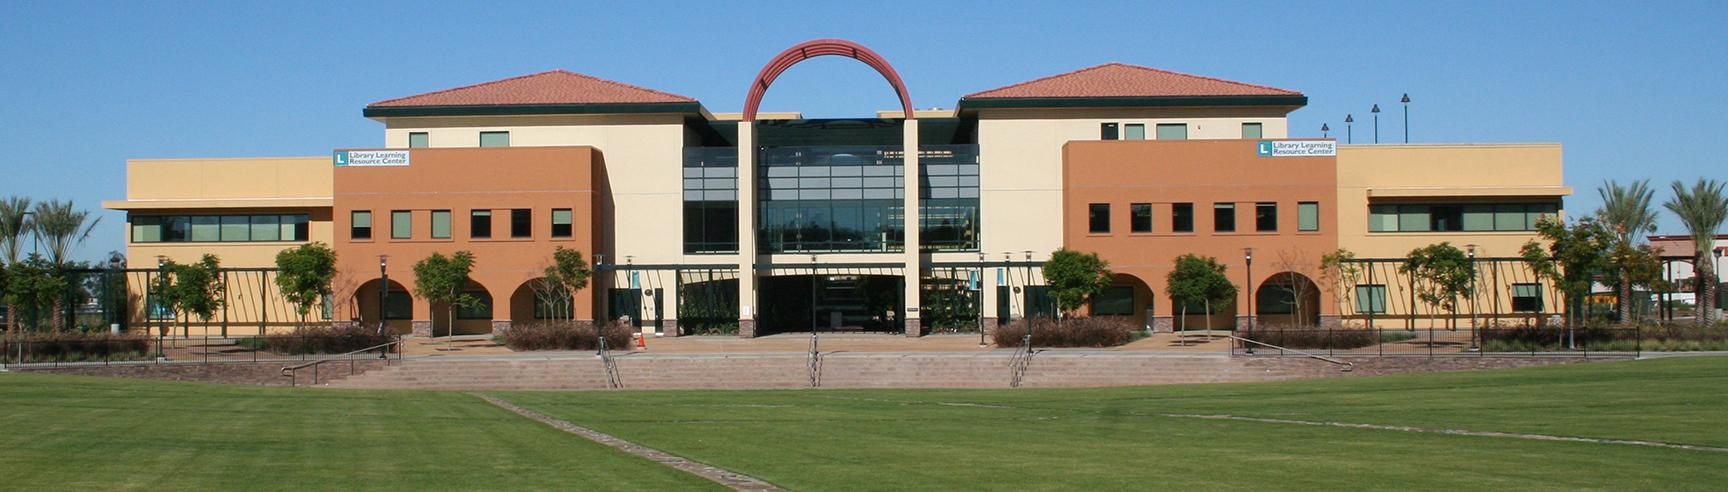 Photo of the San Diego Miramar College LLRC Building